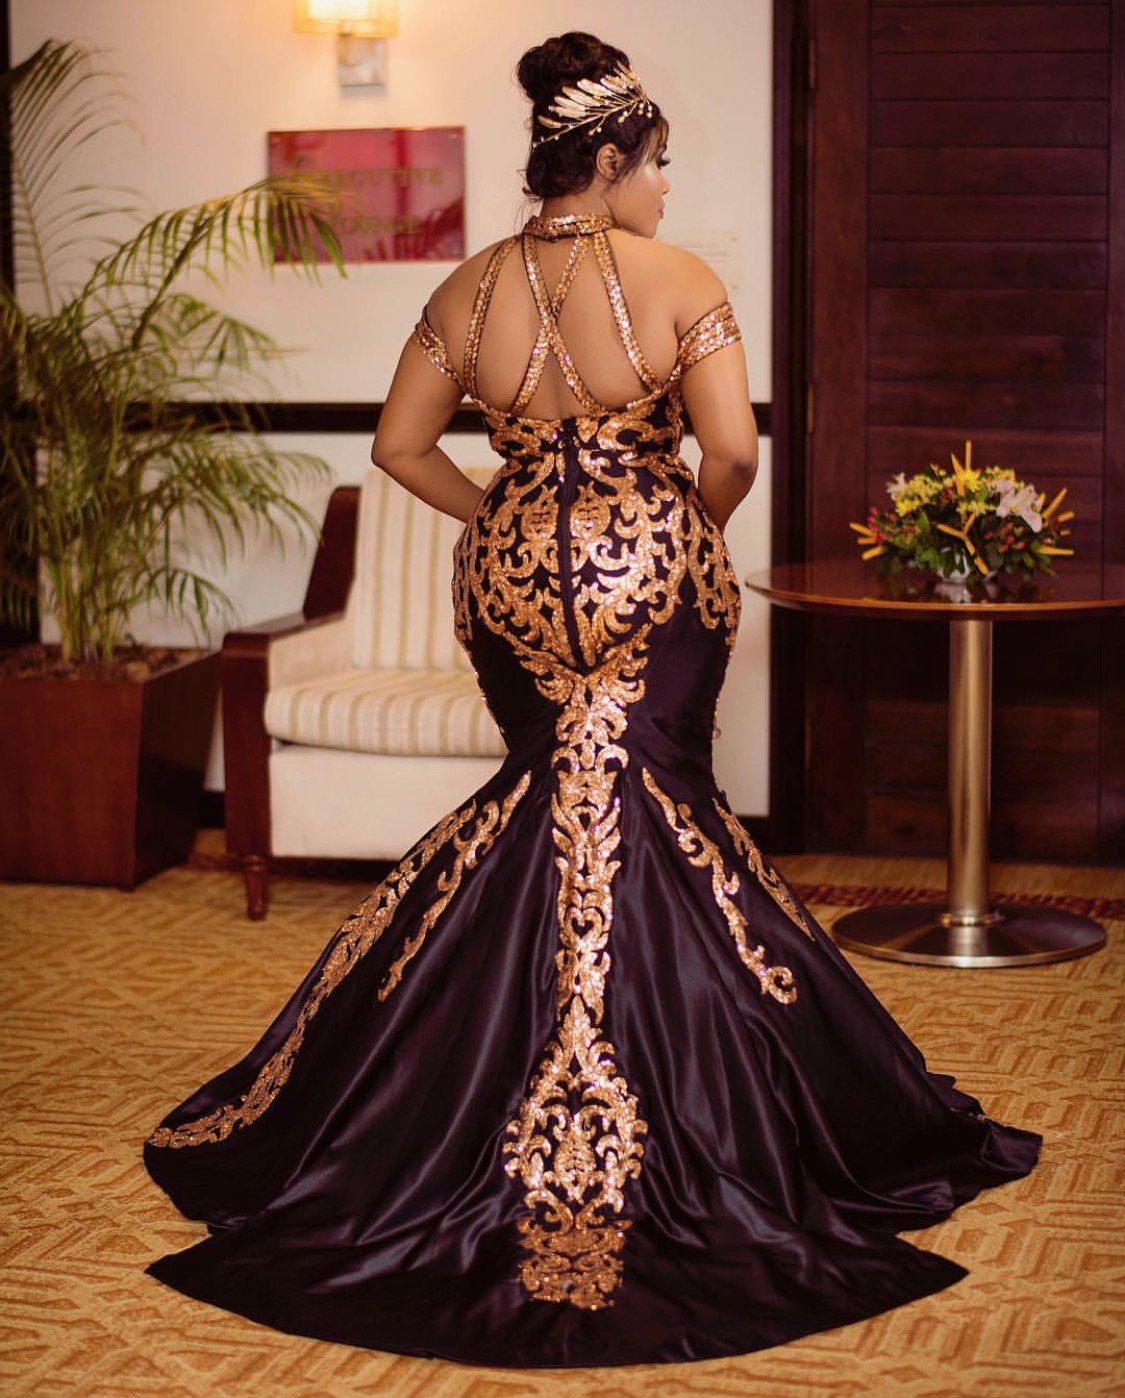 Couture for curvy women - Slaylebrity